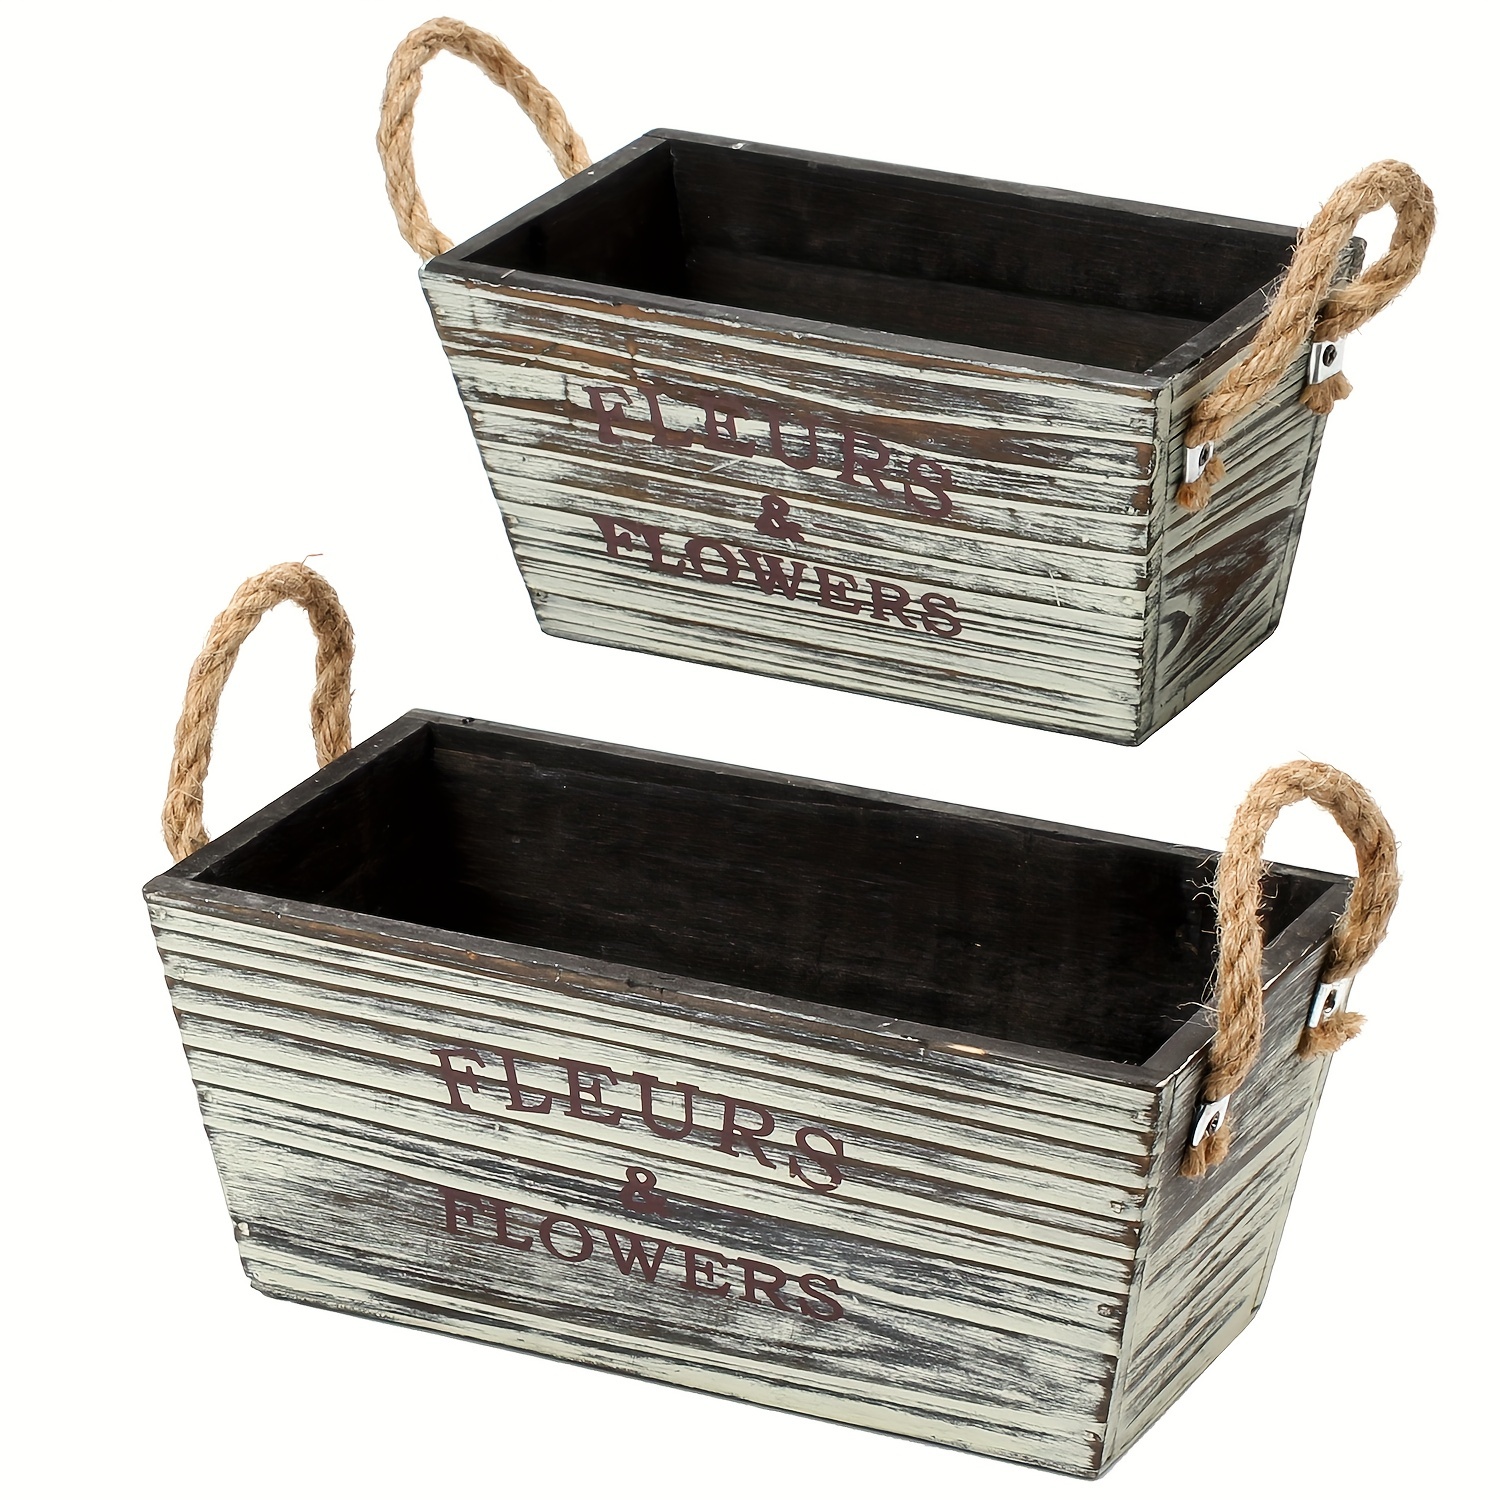 

Vintage Beach Style Wooden Planter Pots With Hemp Rope Handles, Rectangular Home Decor Flower Pots For Indoor & Outdoor Use - Set Of 2